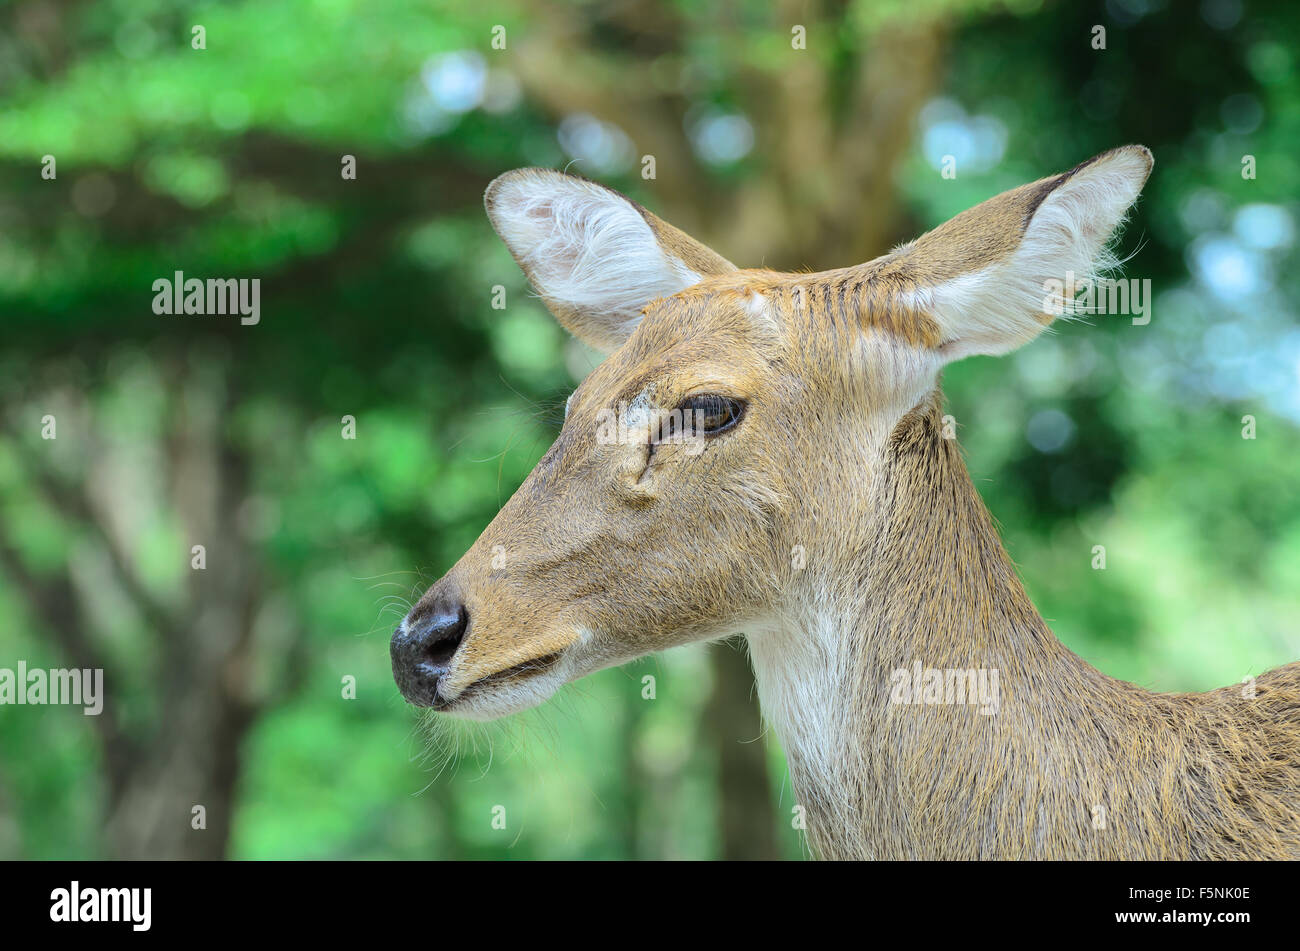 Eld's deer also known as the thamin or brow-antlered deer. Stock Photo